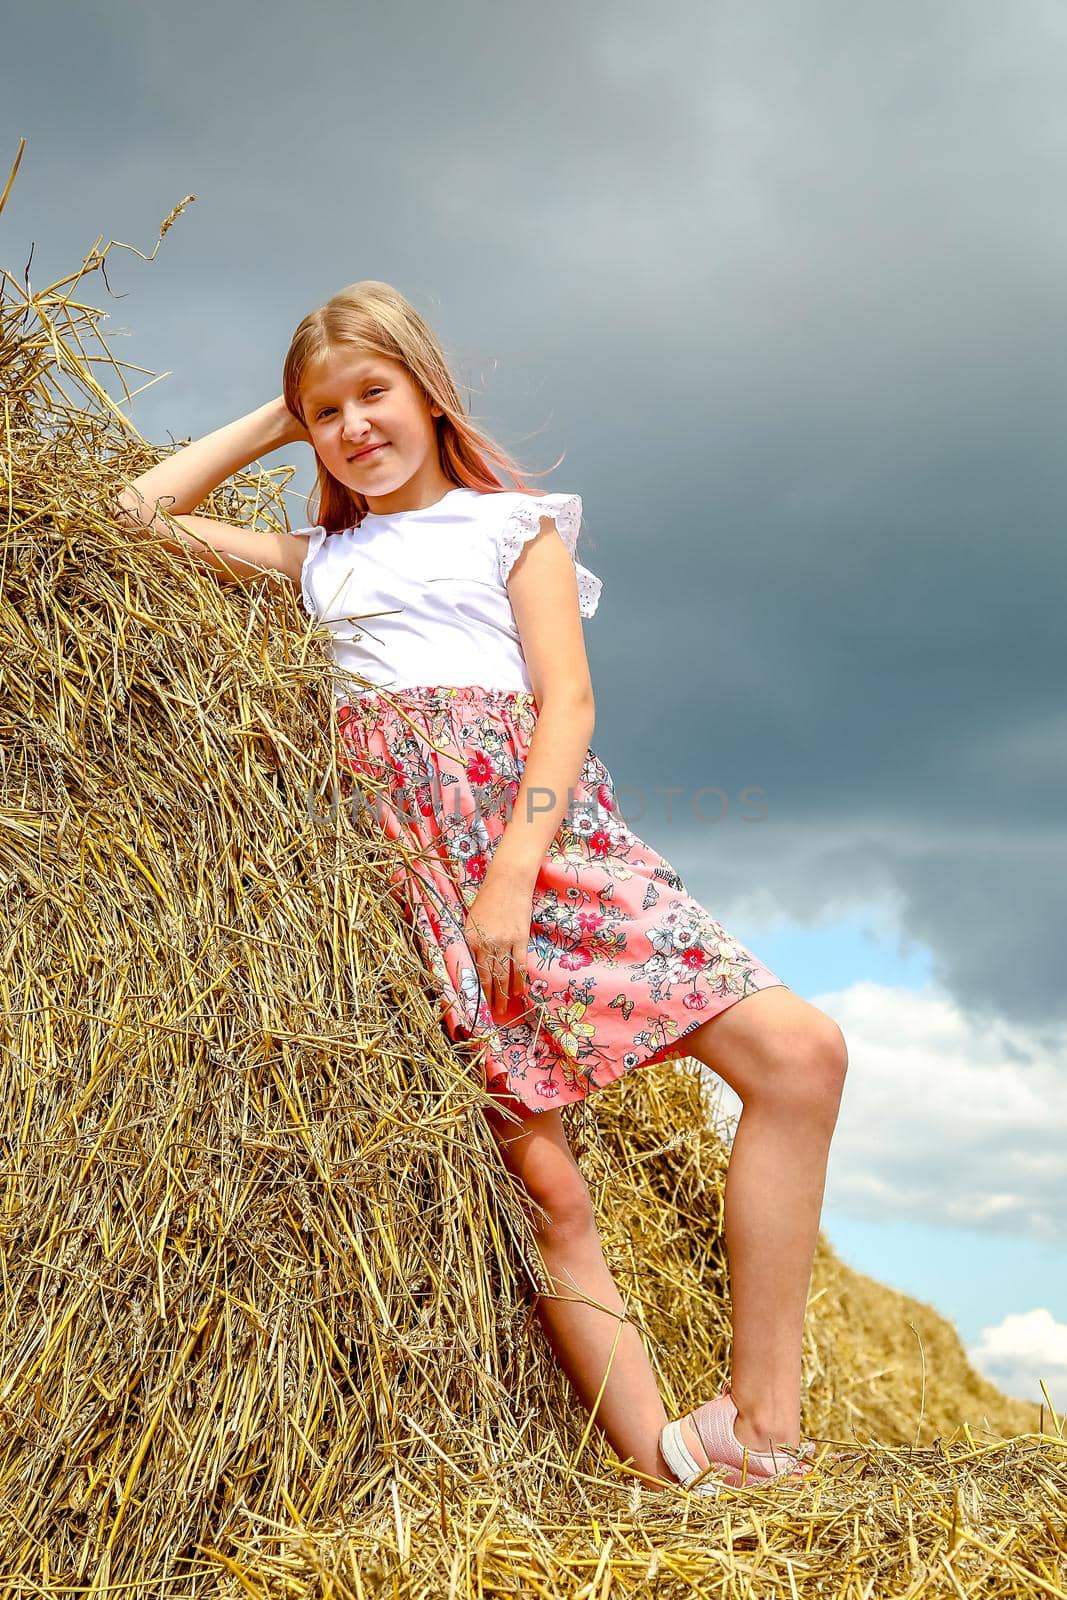 A girl with long flowing hair in a pink dress climbed on large bales of straw by Mastak80